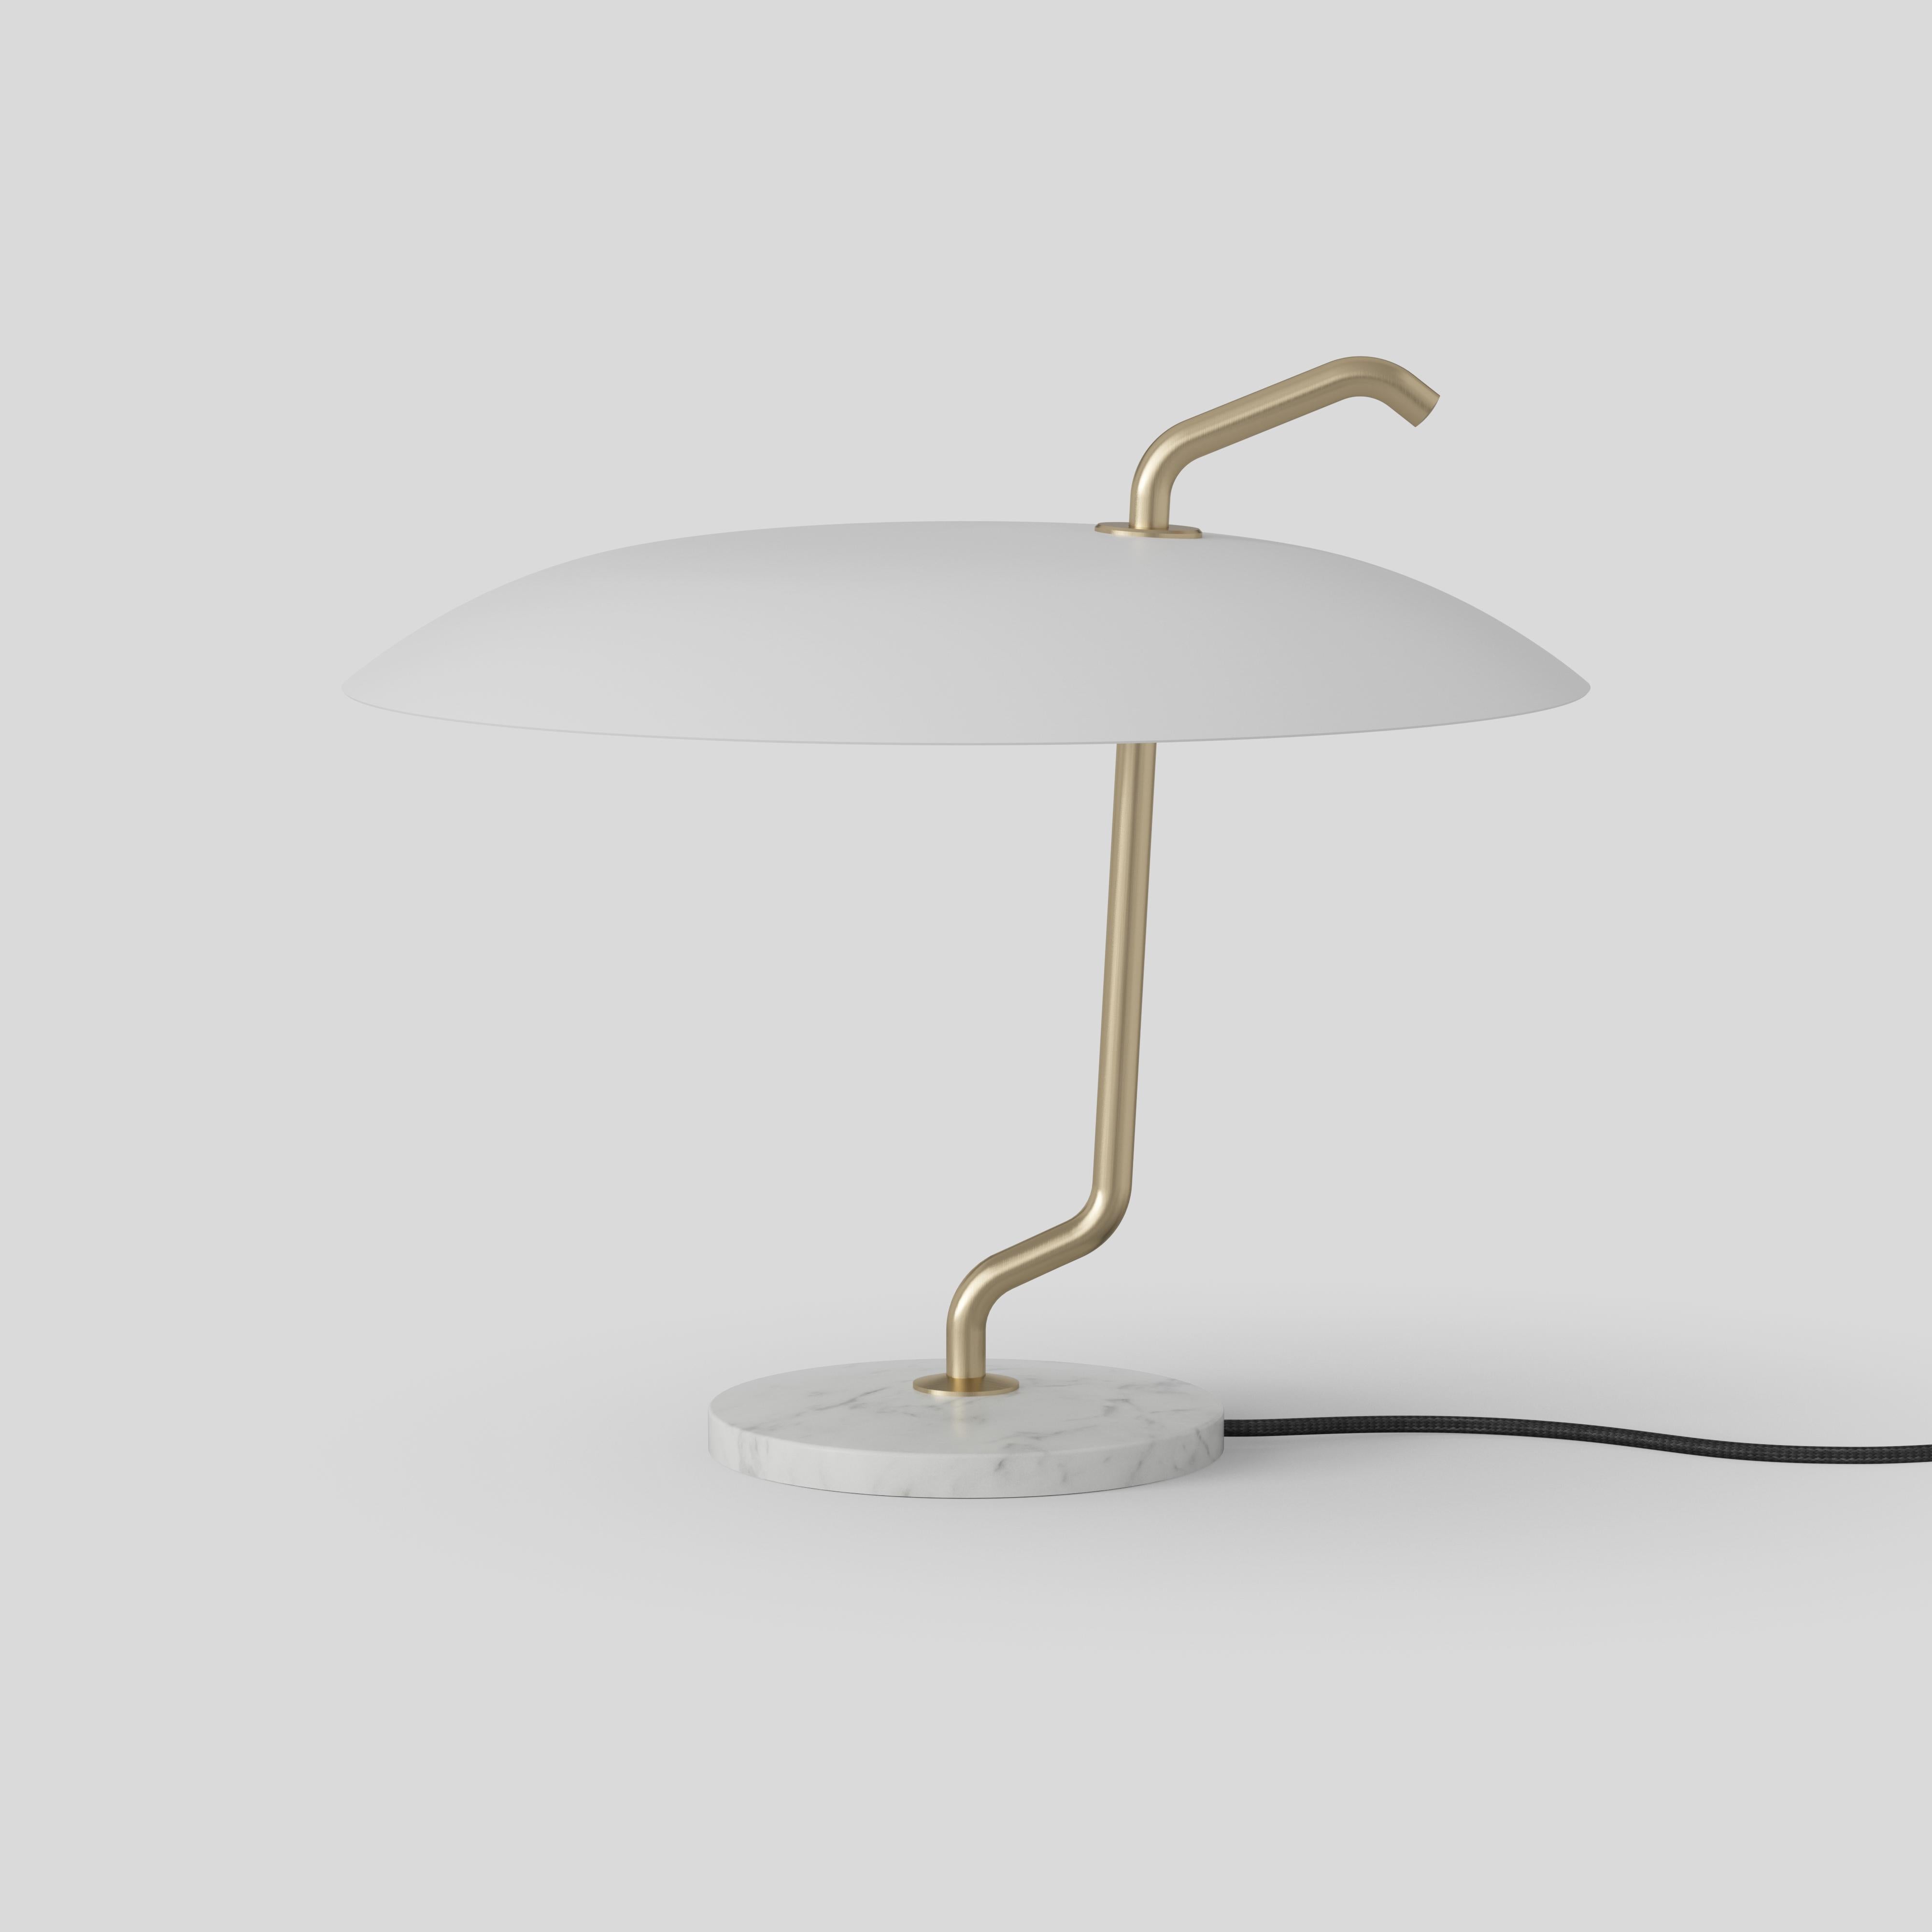 Gino Sarfatti Lamp Model 537 Brass Structure, Black Reflector by Astep In New Condition For Sale In Barcelona, Barcelona